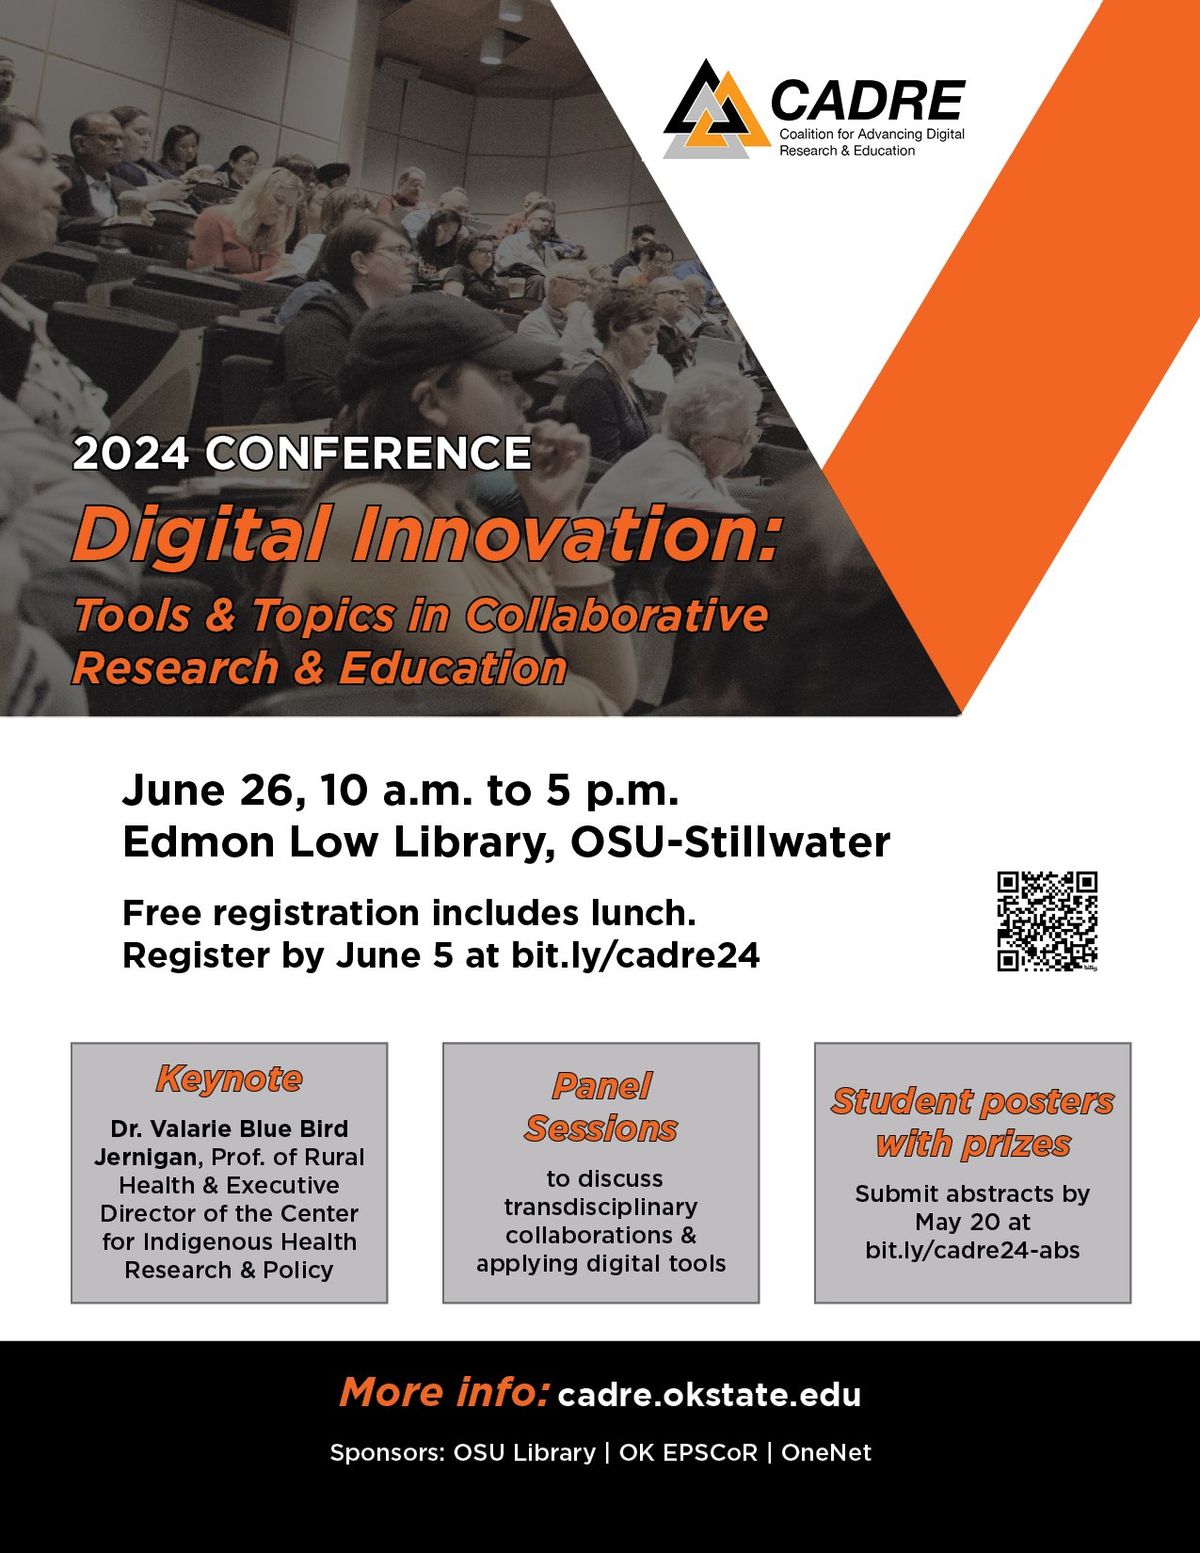 CADRE 2024 Conference - Digital Innovation: Tools & Topics in Collaborative Research & Education